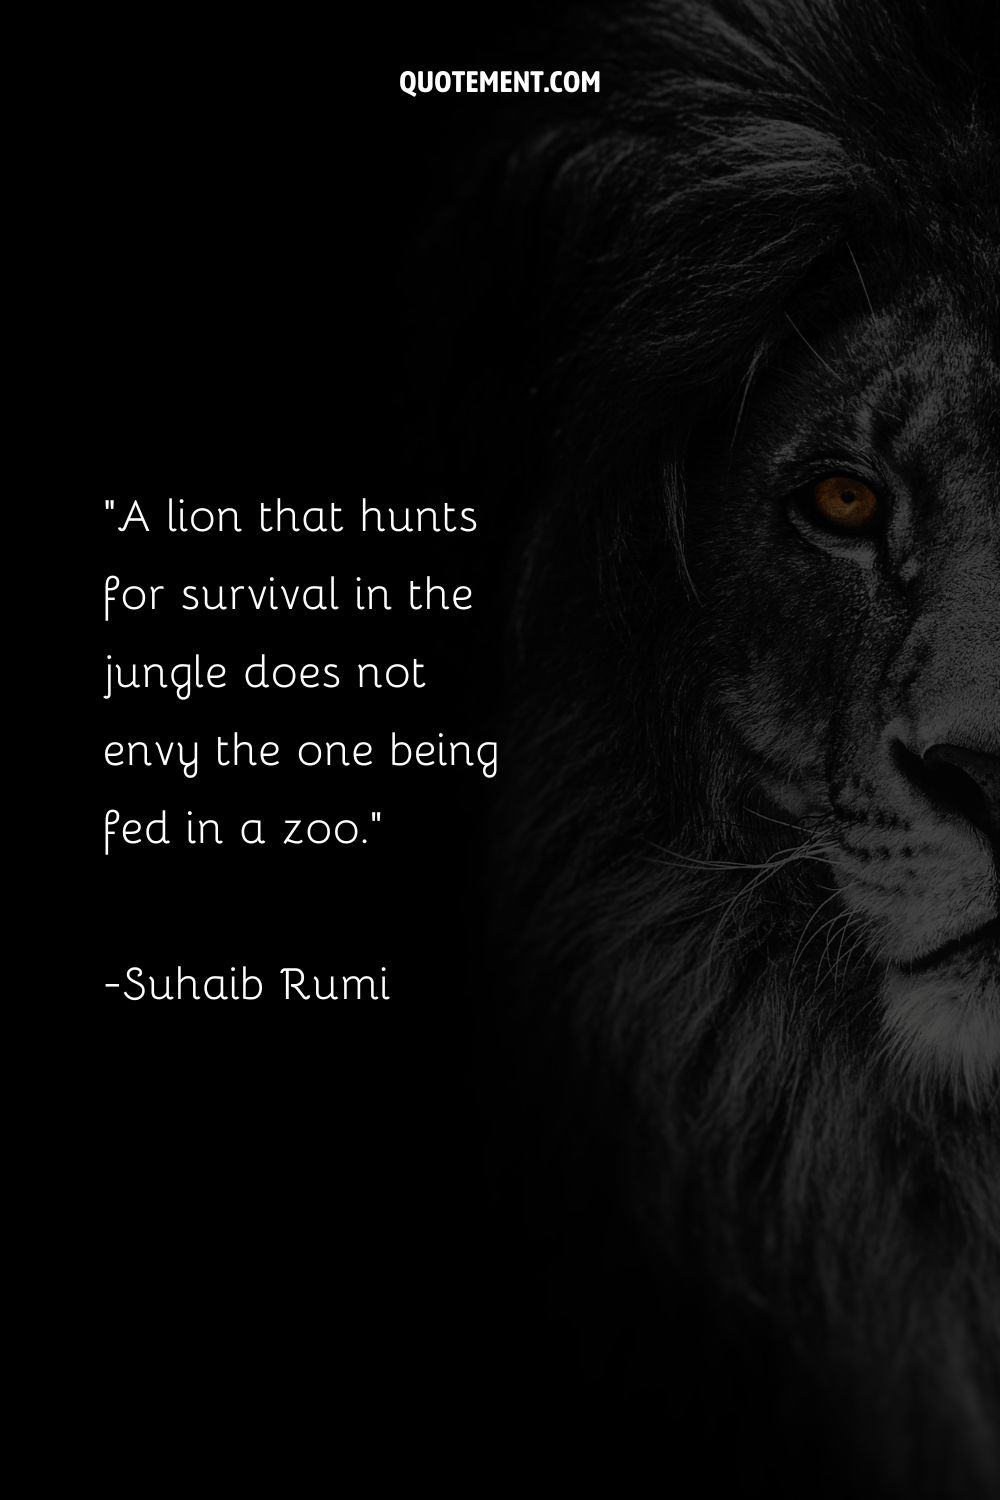 A lion that hunts for survival in the jungle does not envy the one being fed in a zoo